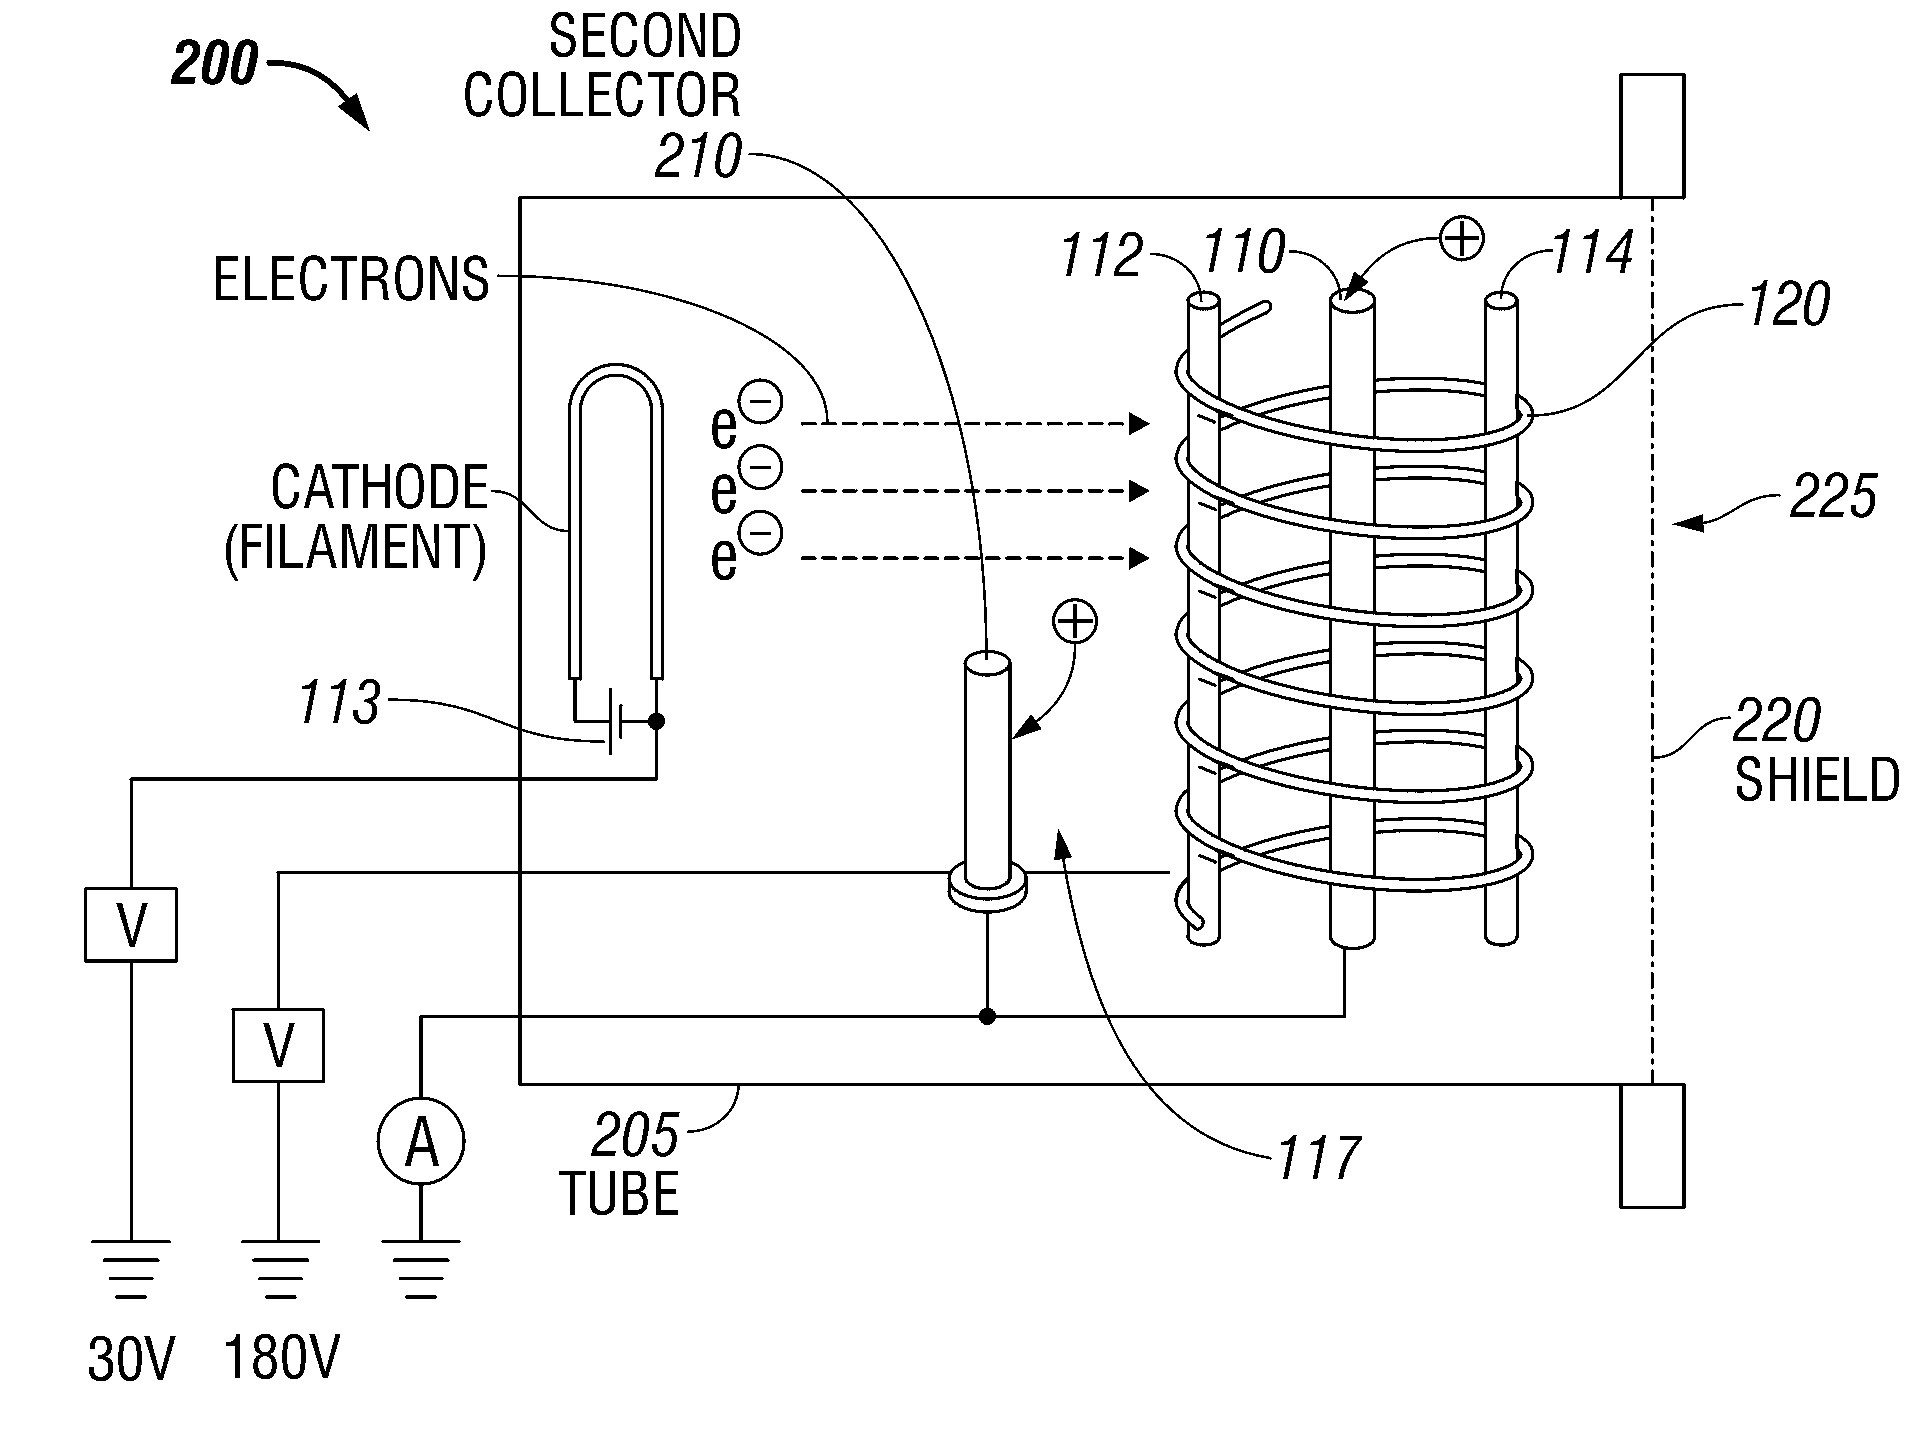 Ionization Gauge With Operational Parameters And Geometry Designed For High Pressure Operation